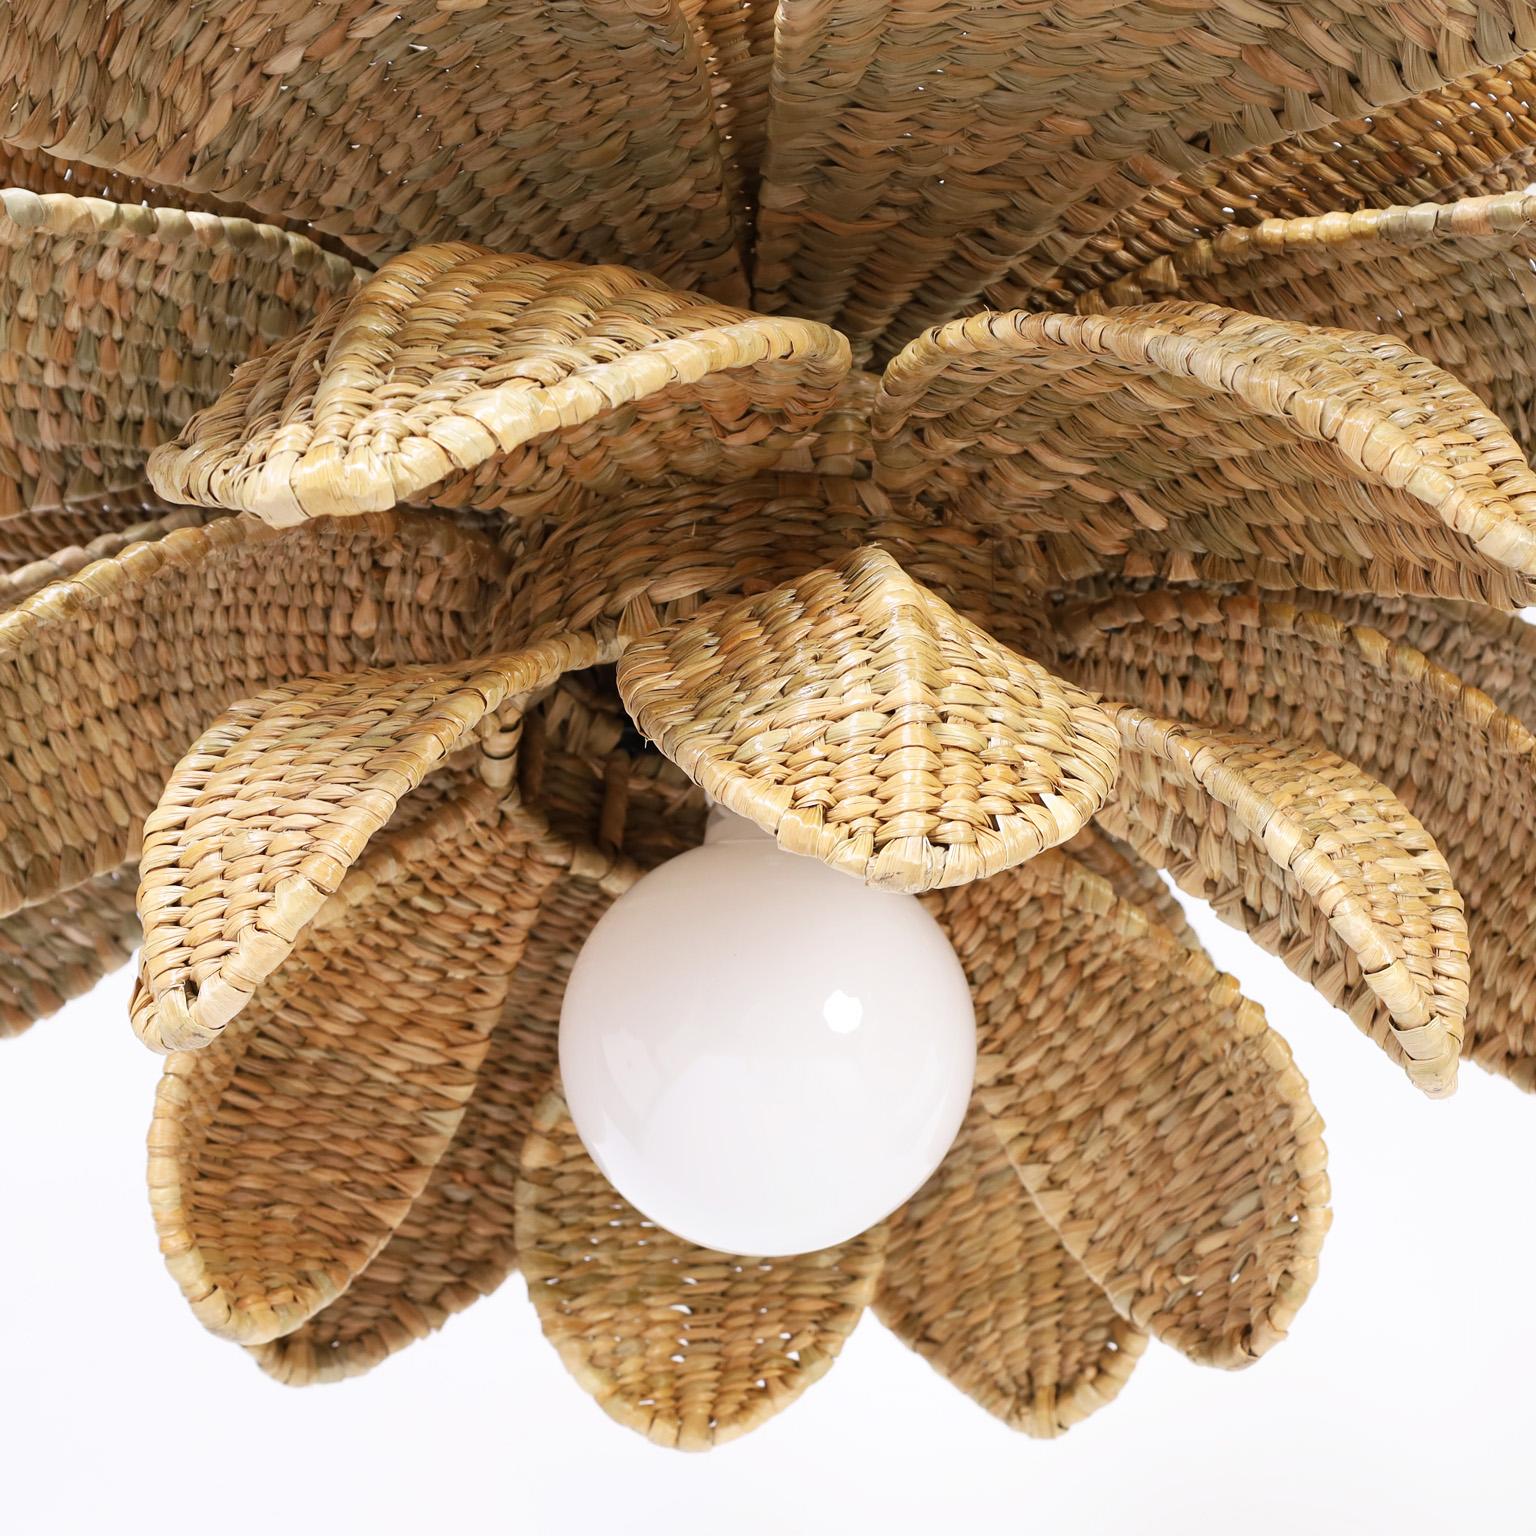 Mexican Wicker Lotus Light Fixture or Pendant From the Flores Collection